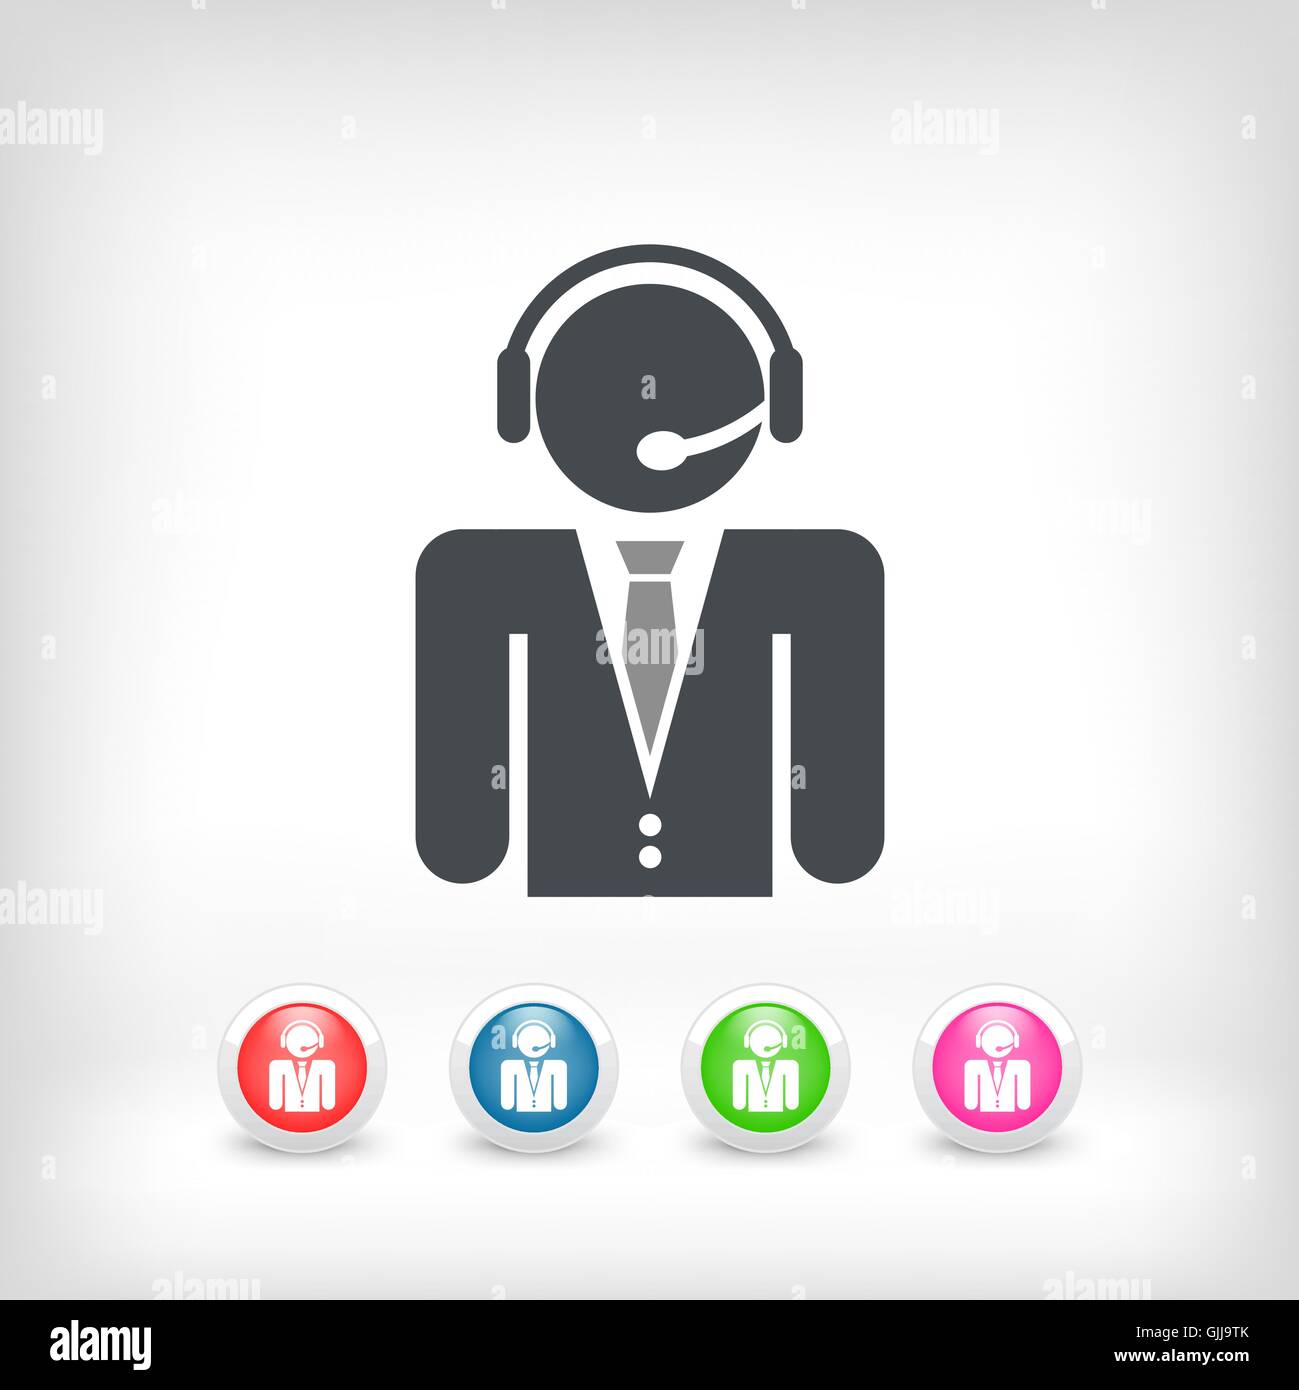 Contact assistance icon Stock Vector